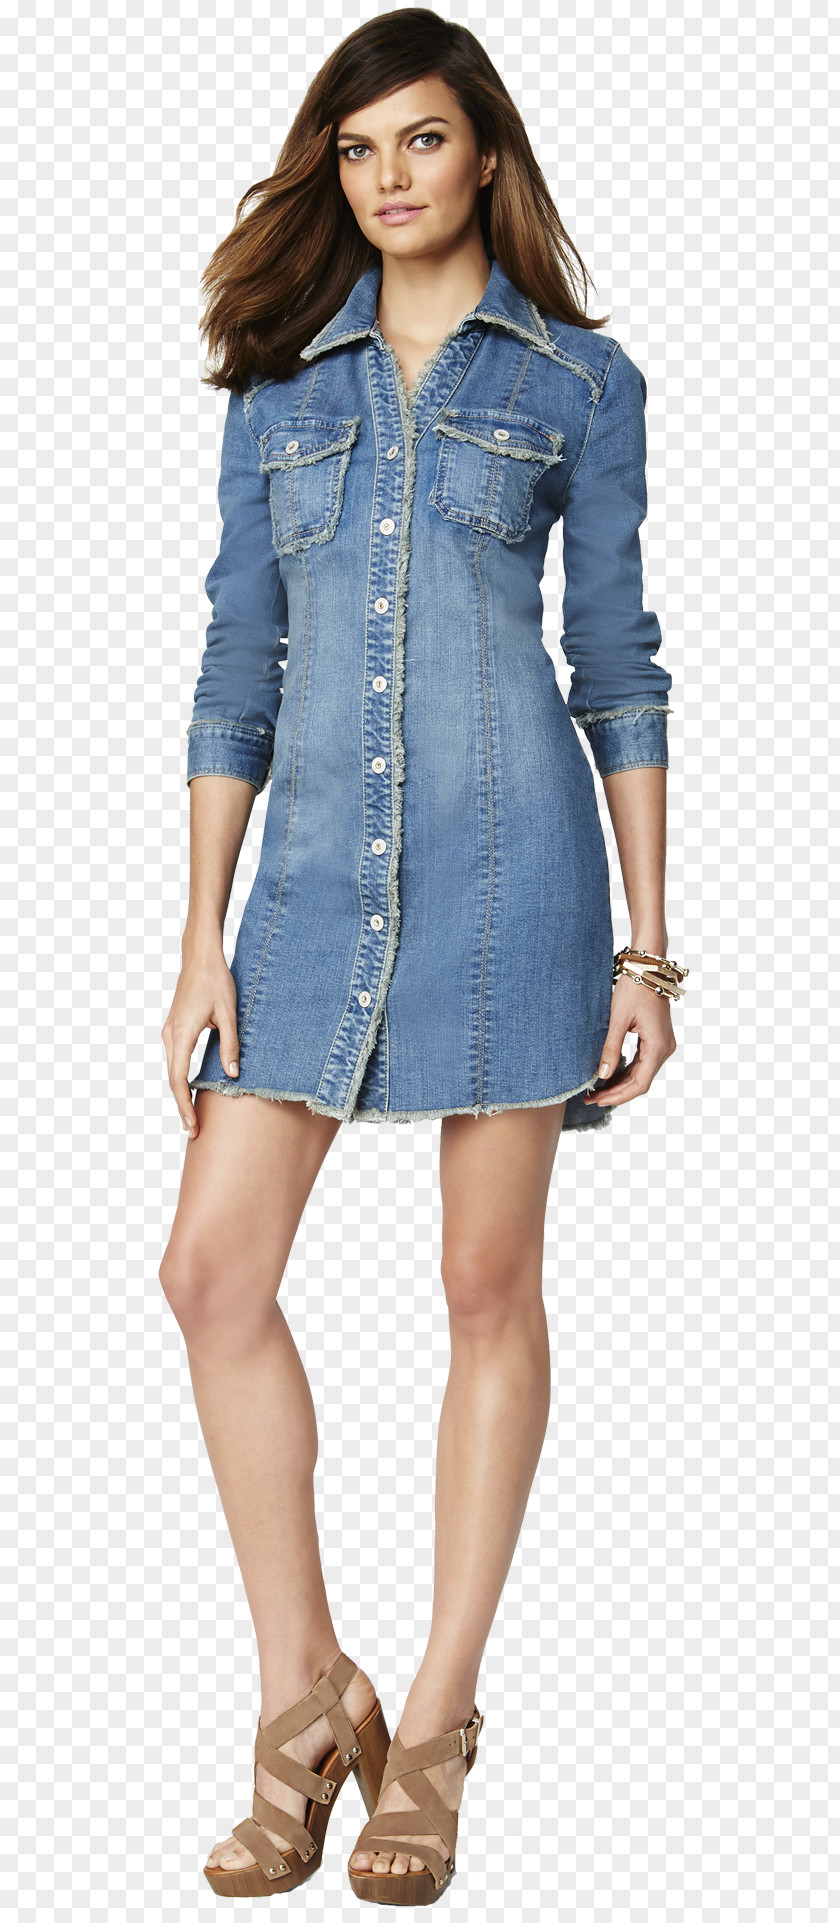 Denim Fabric Jeans Dress Casual Fashion PNG